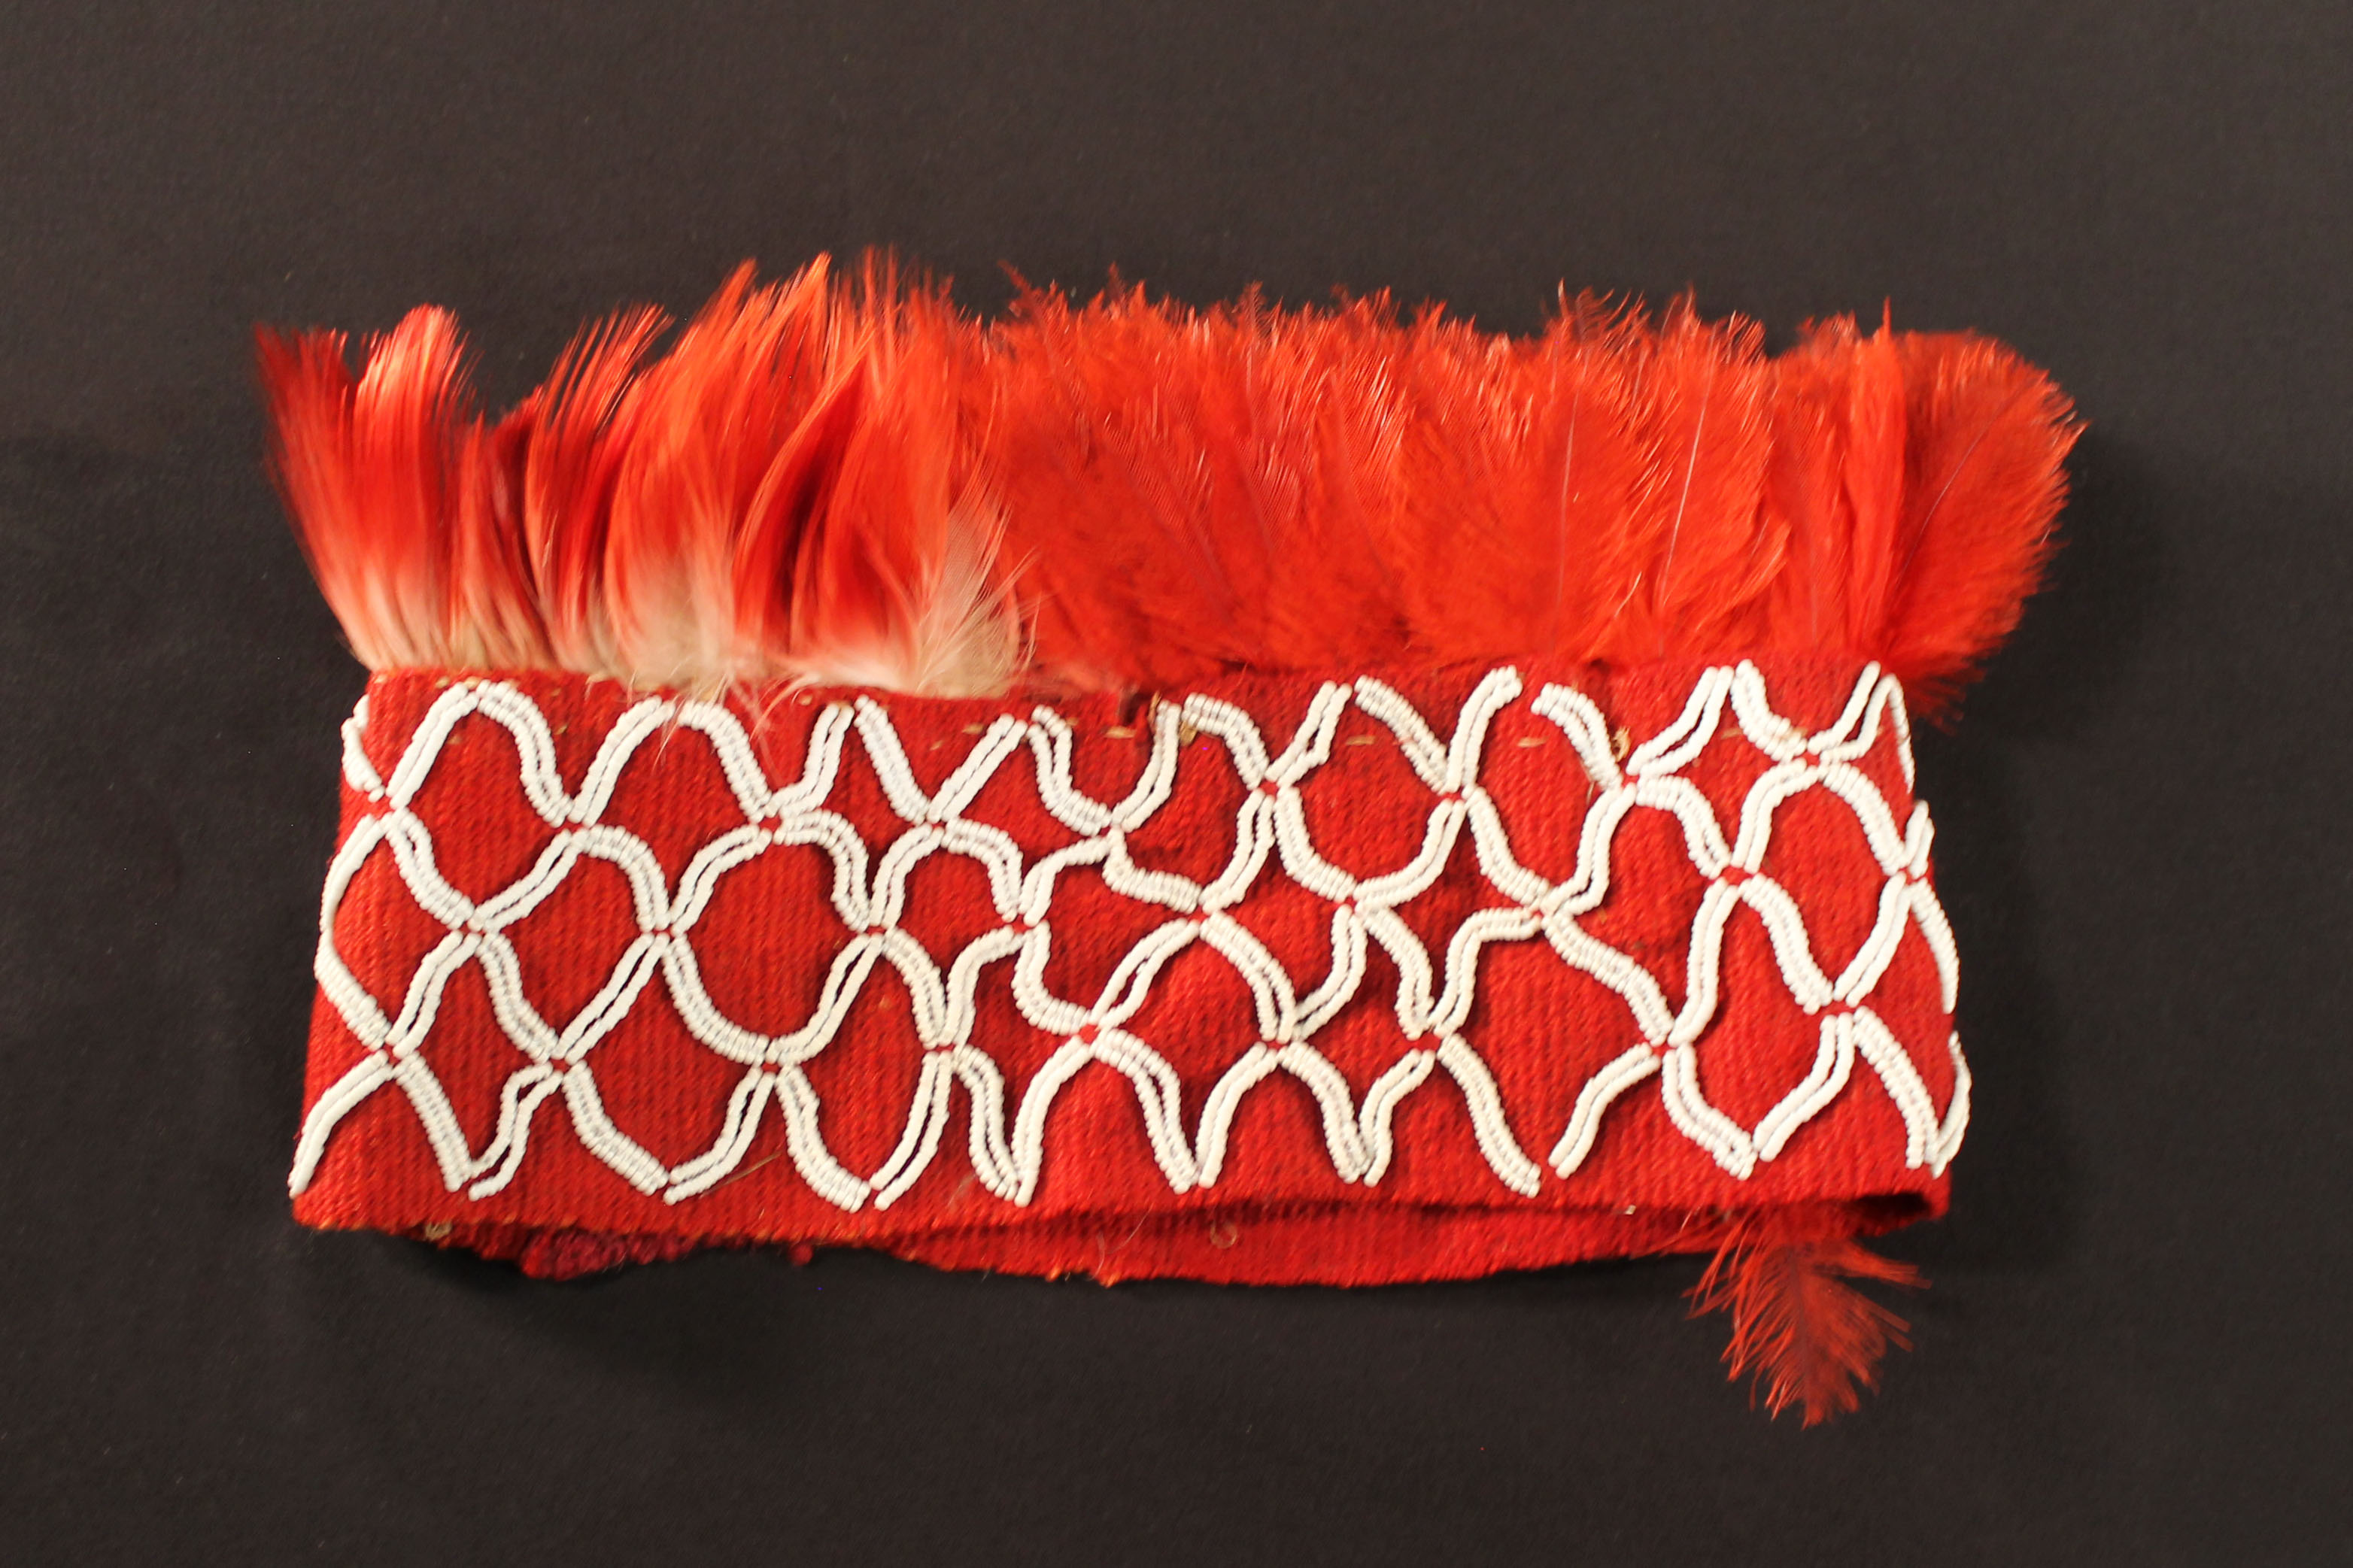 Headdress of red woven material with red feathers sewn to the top of the headband. Body of band decorated with repeated white diamond design. 